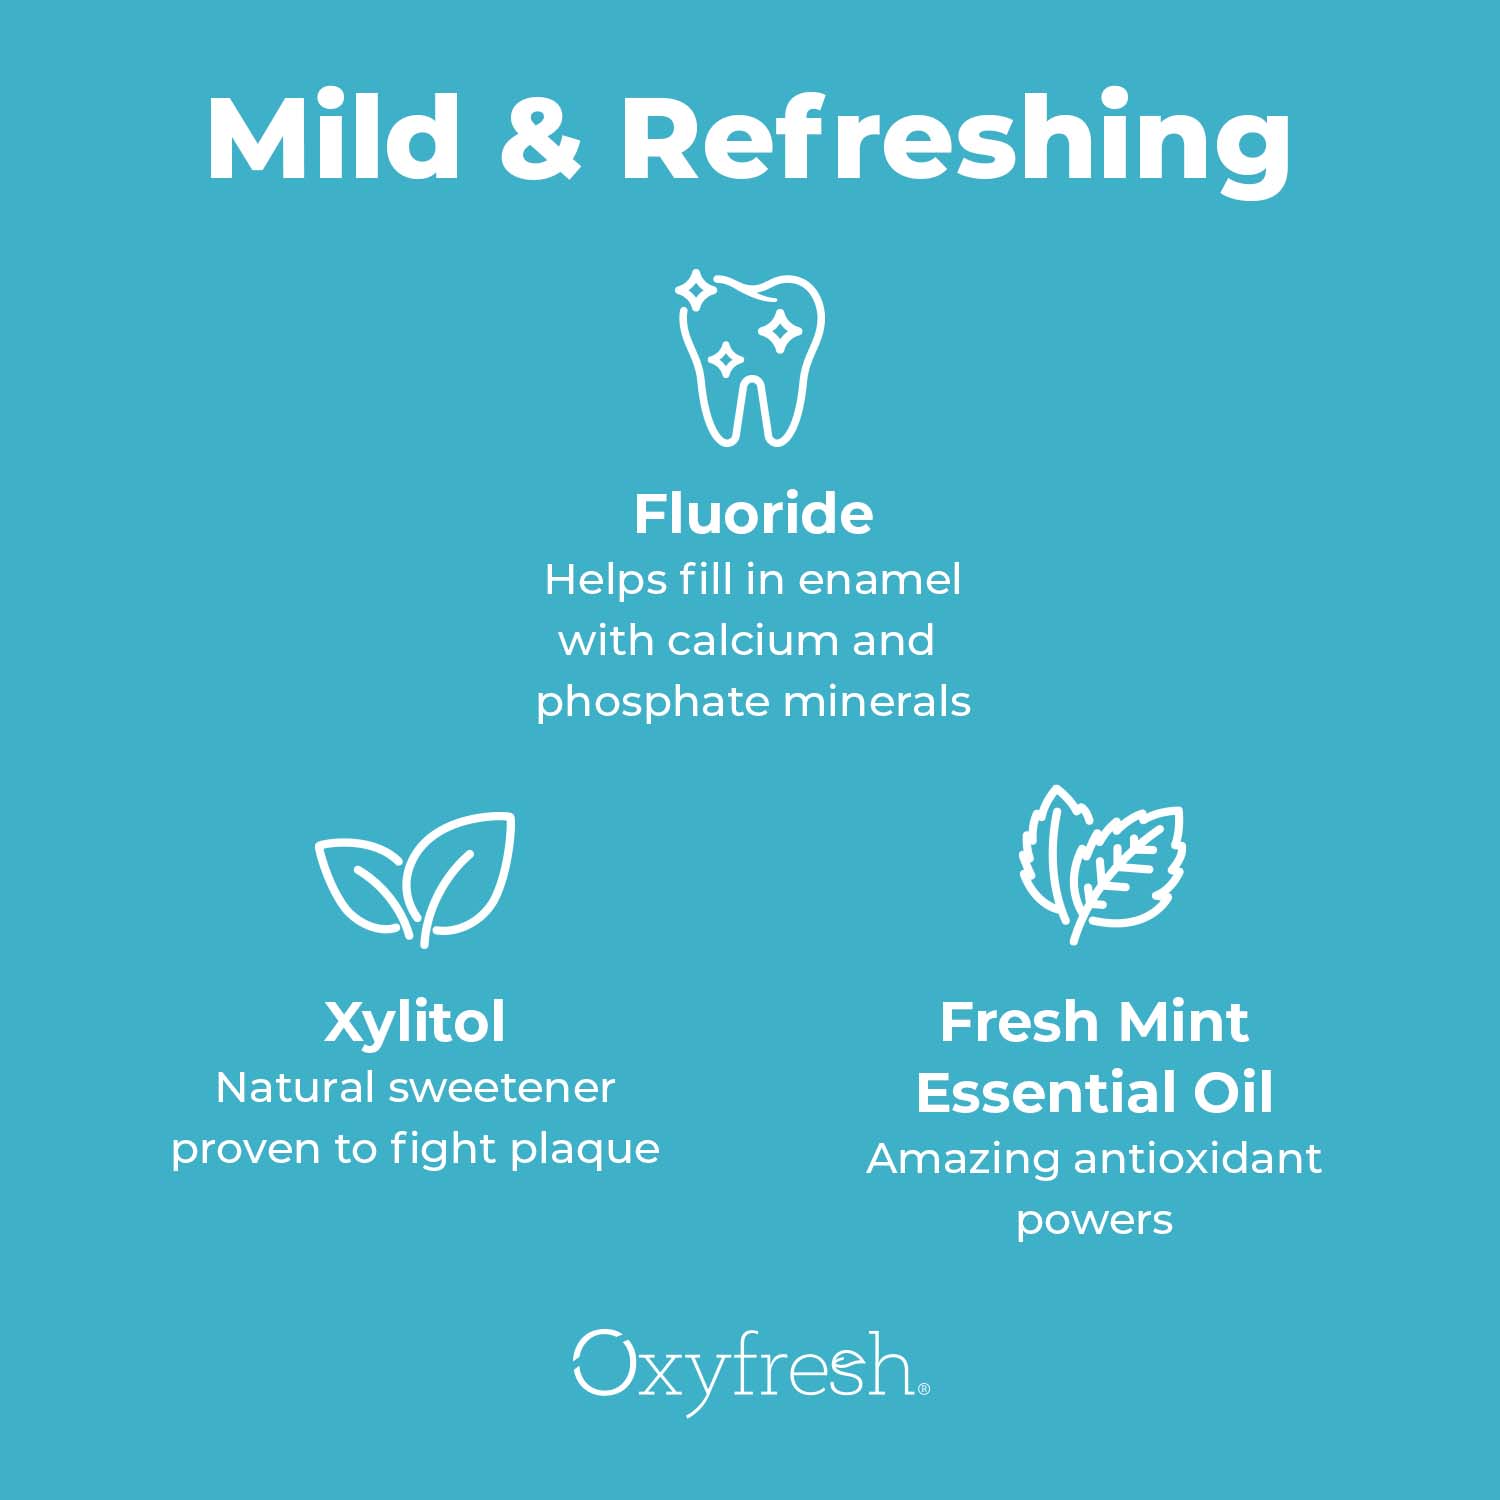 oxyfresh-cavity-protection-mouthwash-mild-and-refreshing-with-fluoride-xylitol-and-fresh-mint-essential-oil